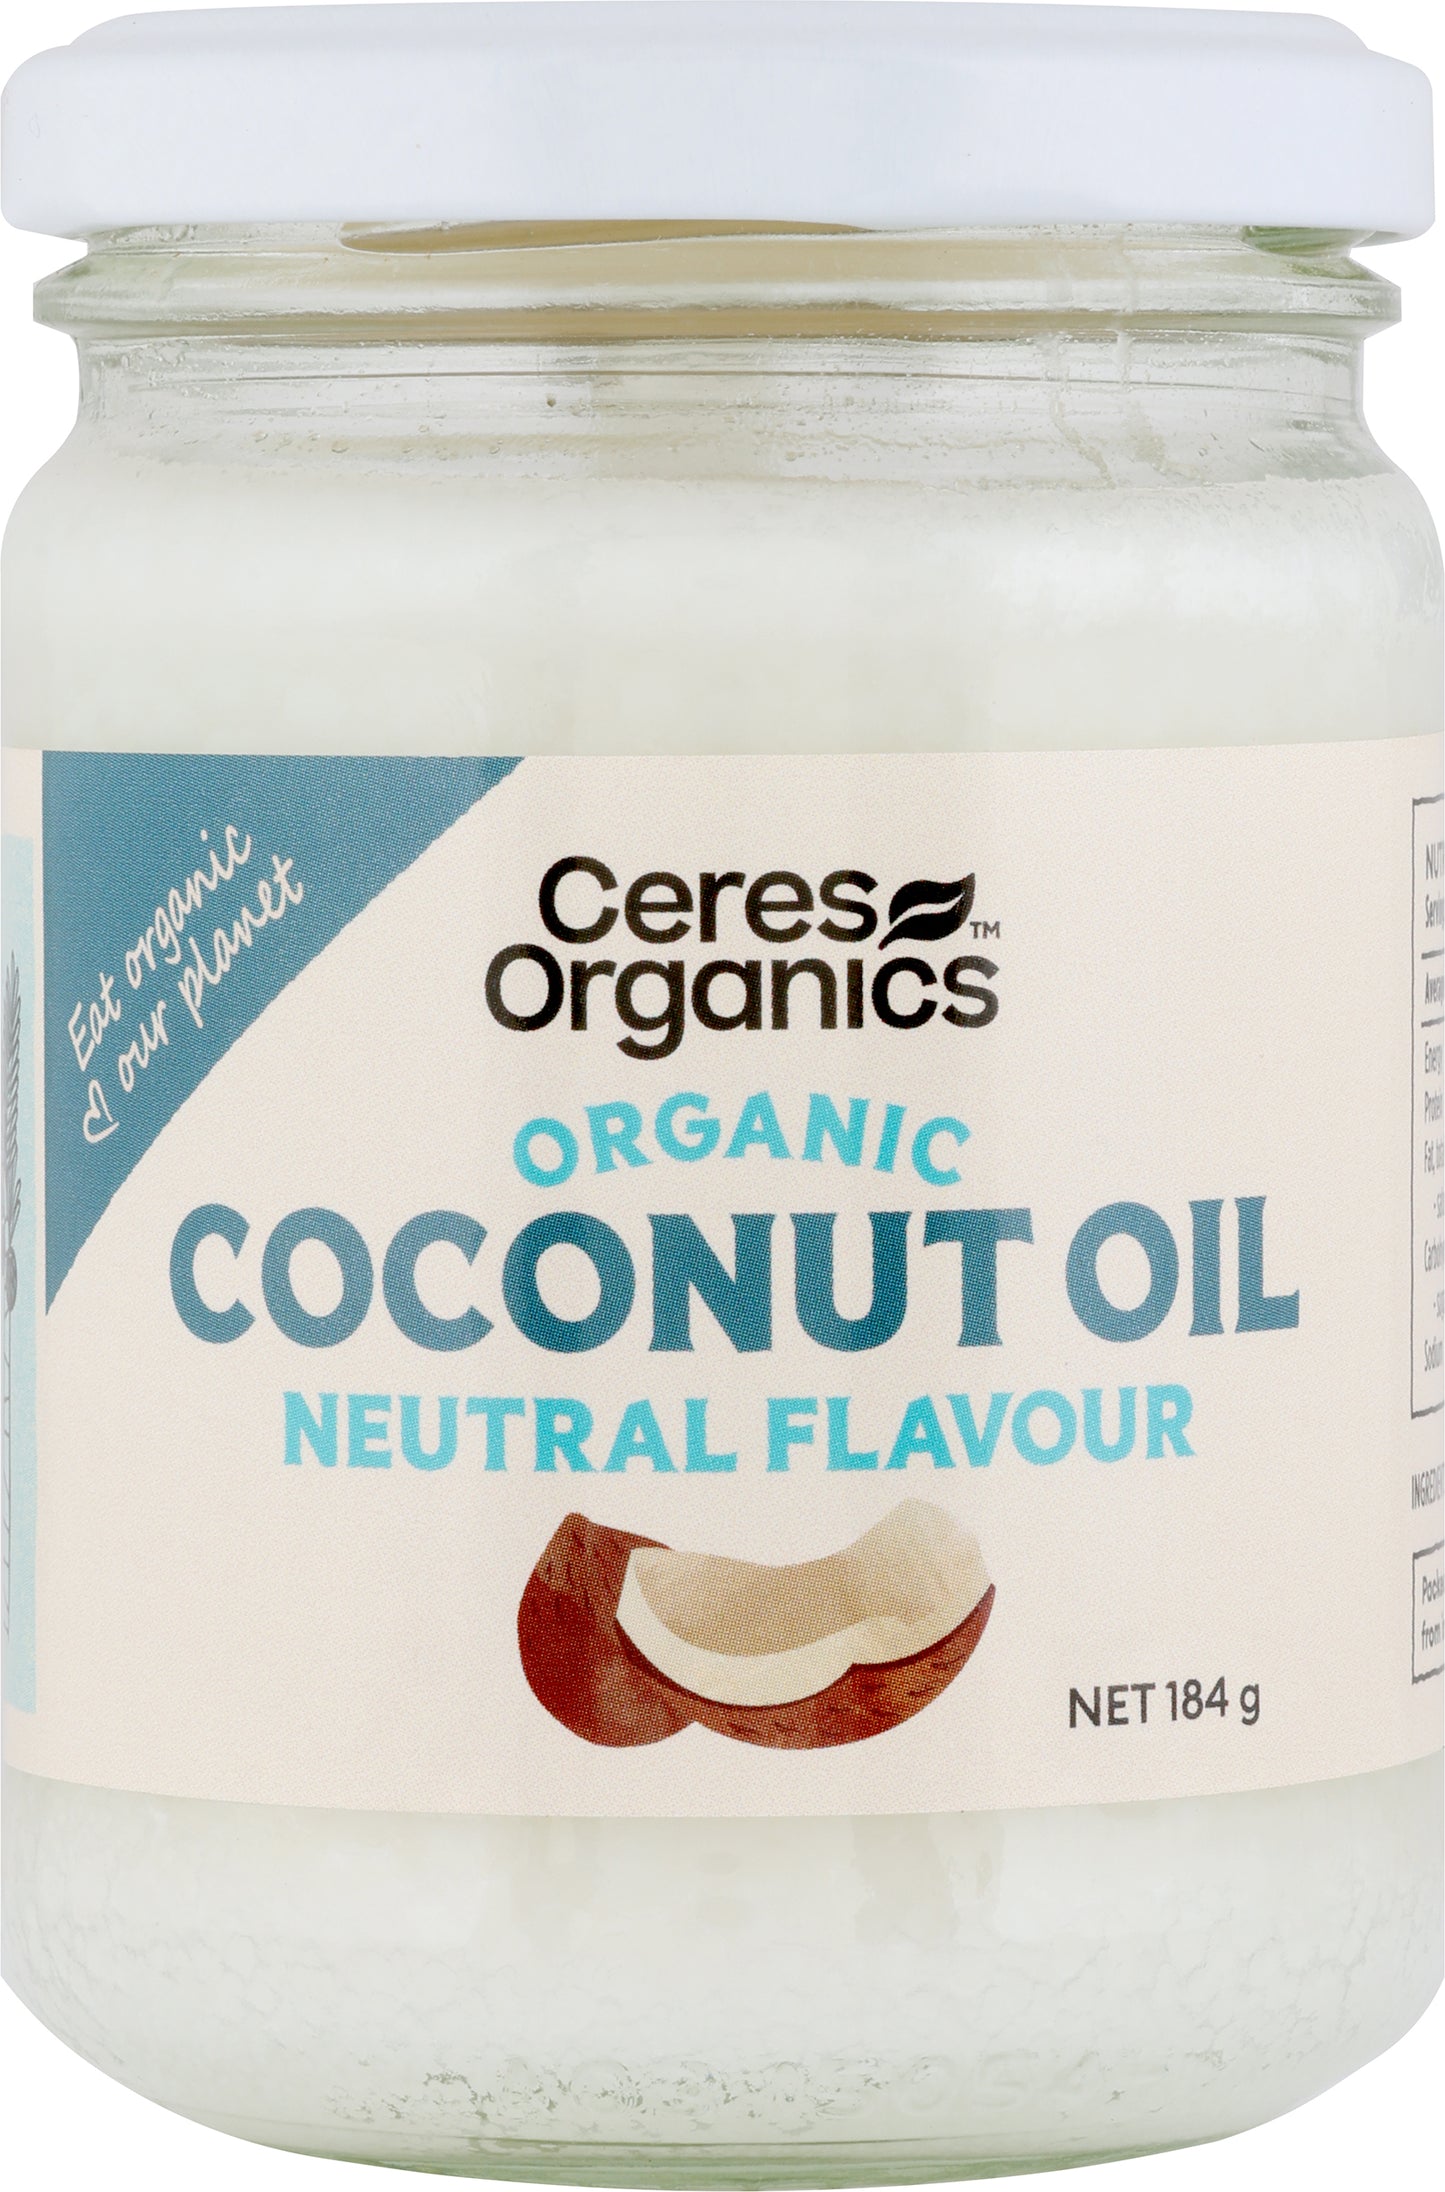 Organic Coconut Oil, Neutral Flavour (formerly High Heat) - 200ml